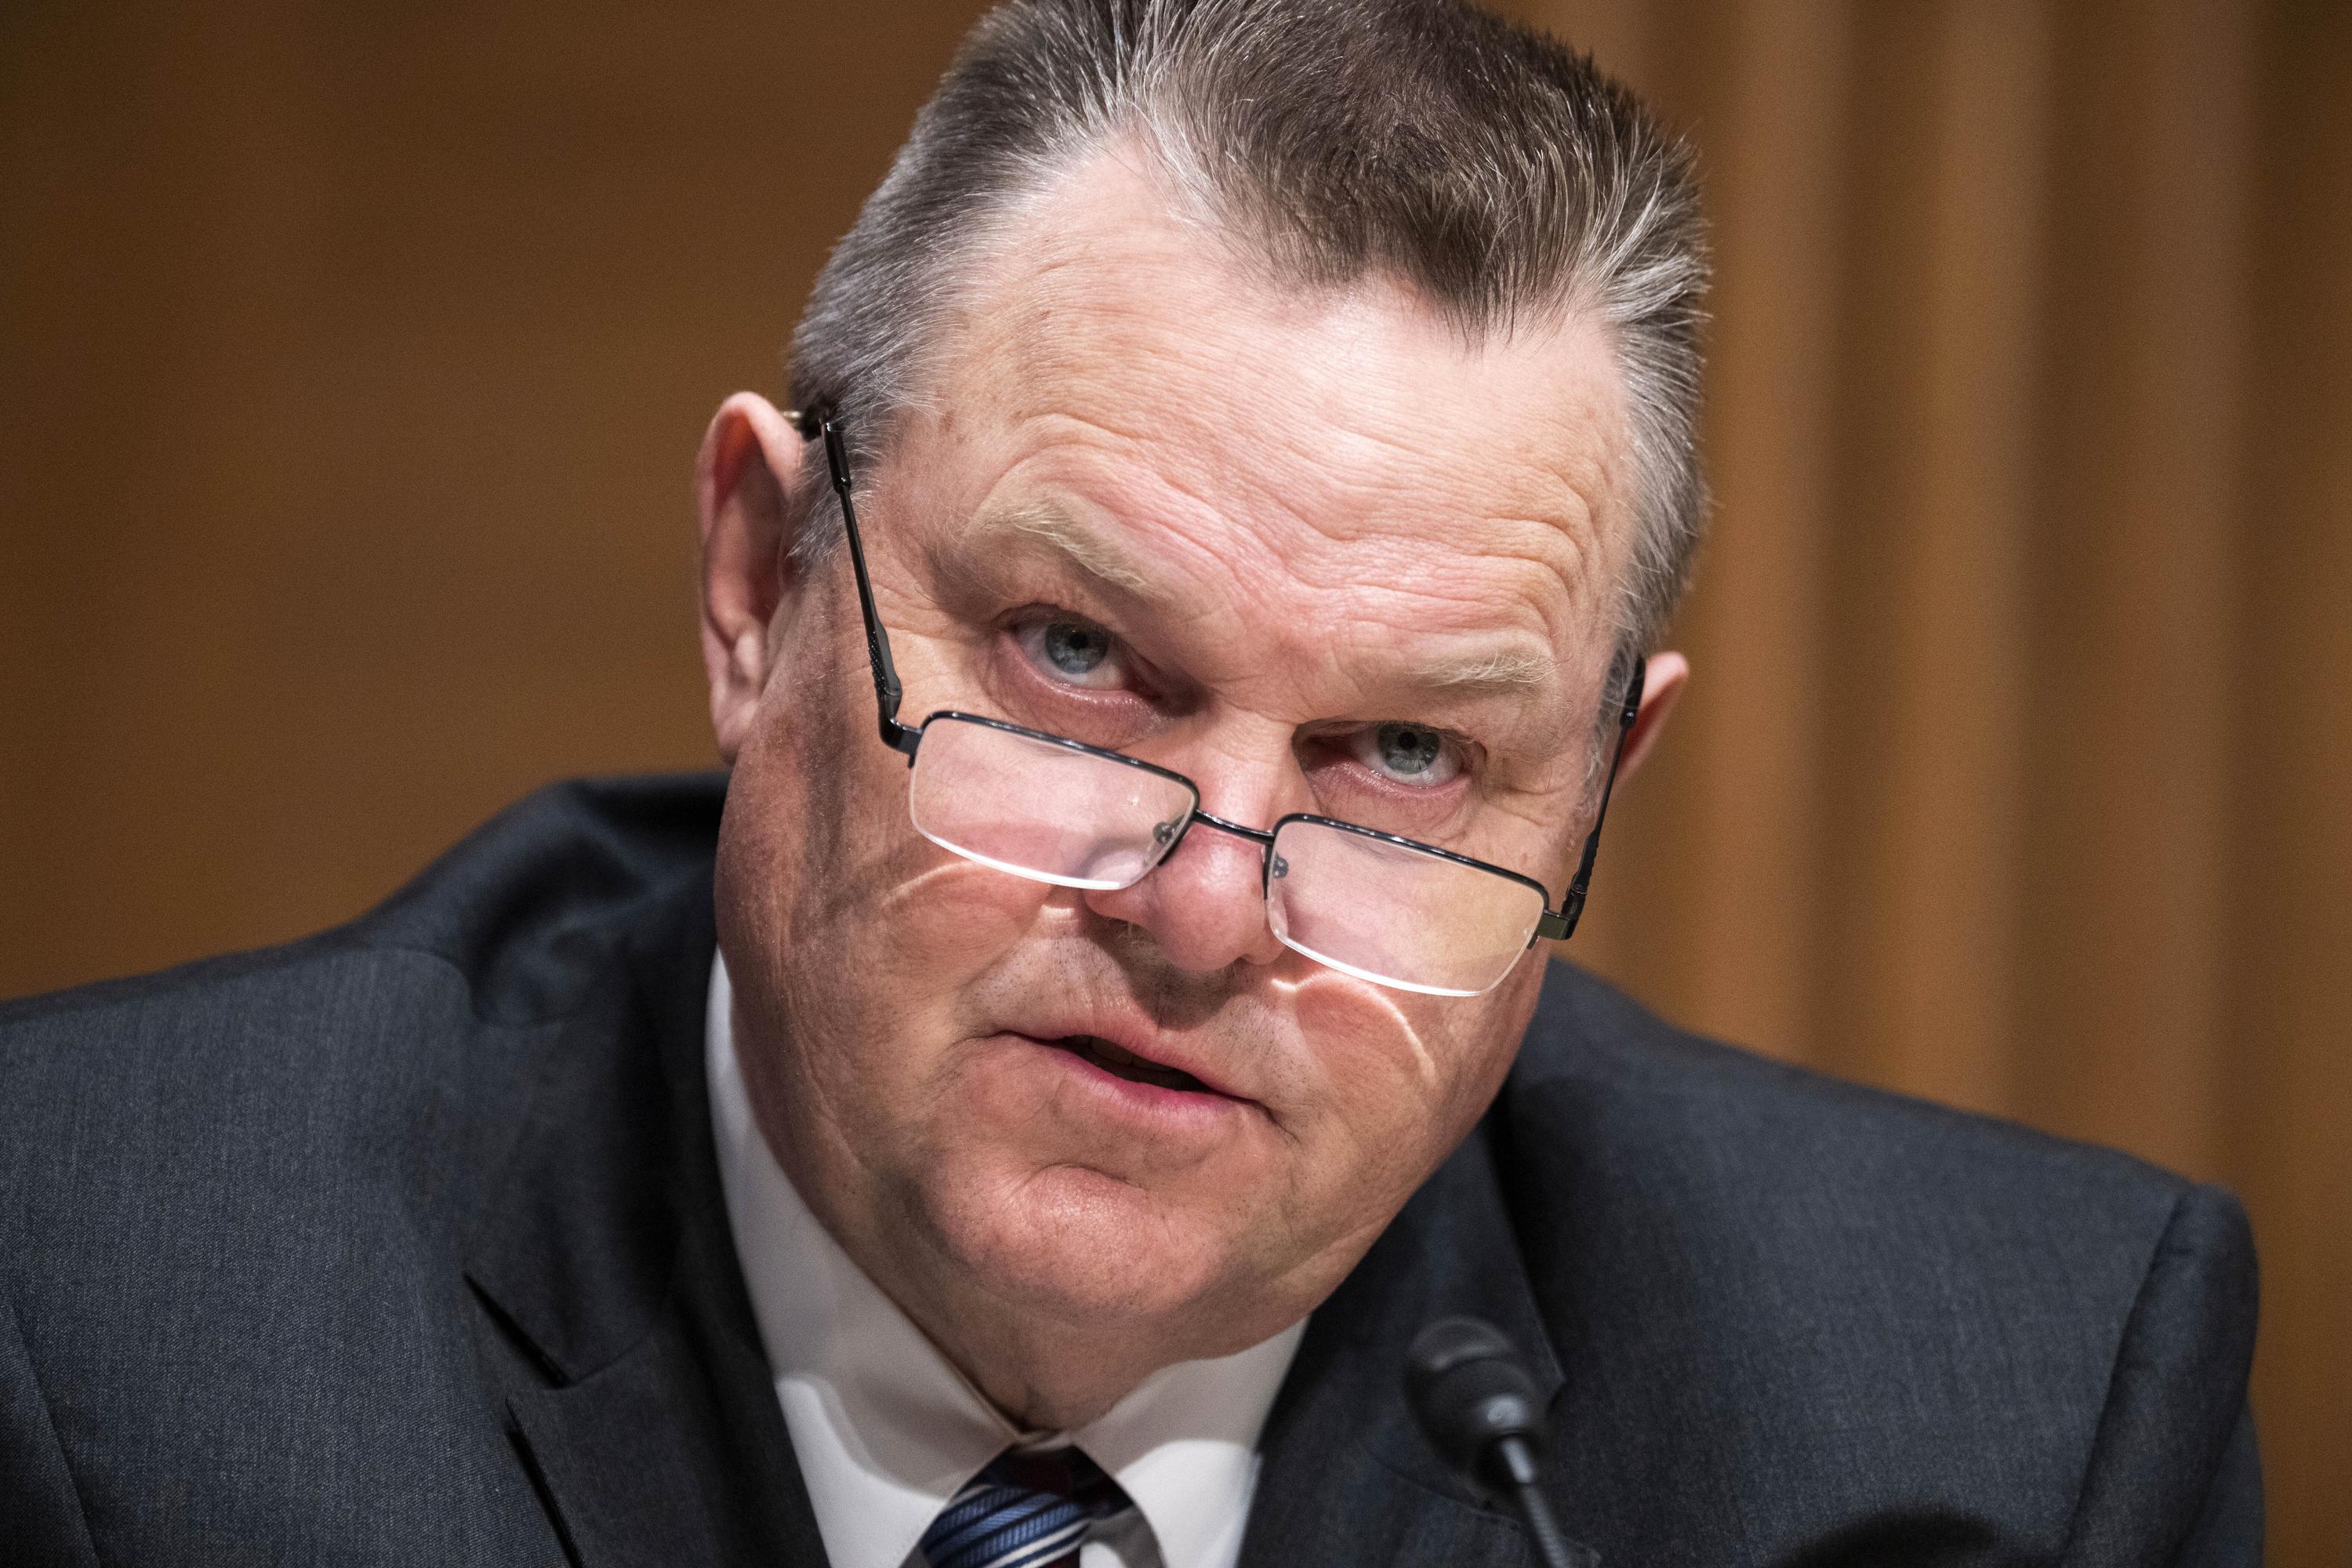 Republicans seek to change Montana primary to thwart Tester